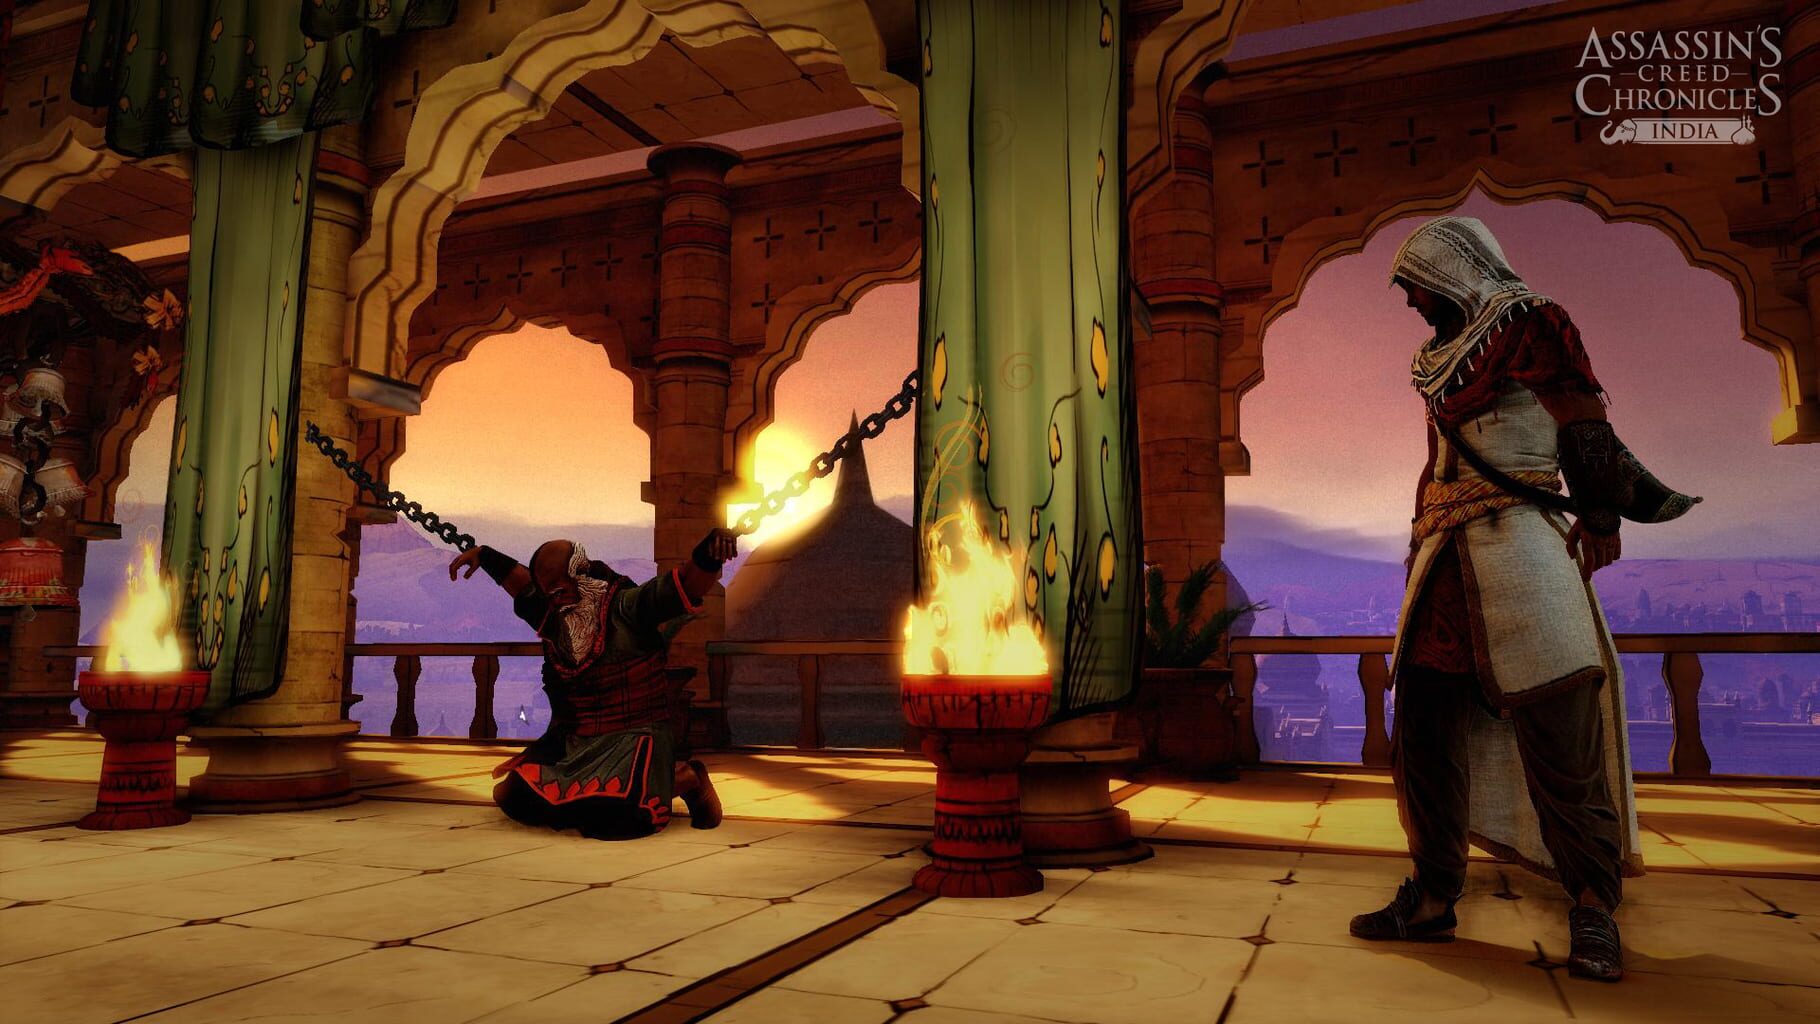 Assassin's Creed Chronicles: India Image